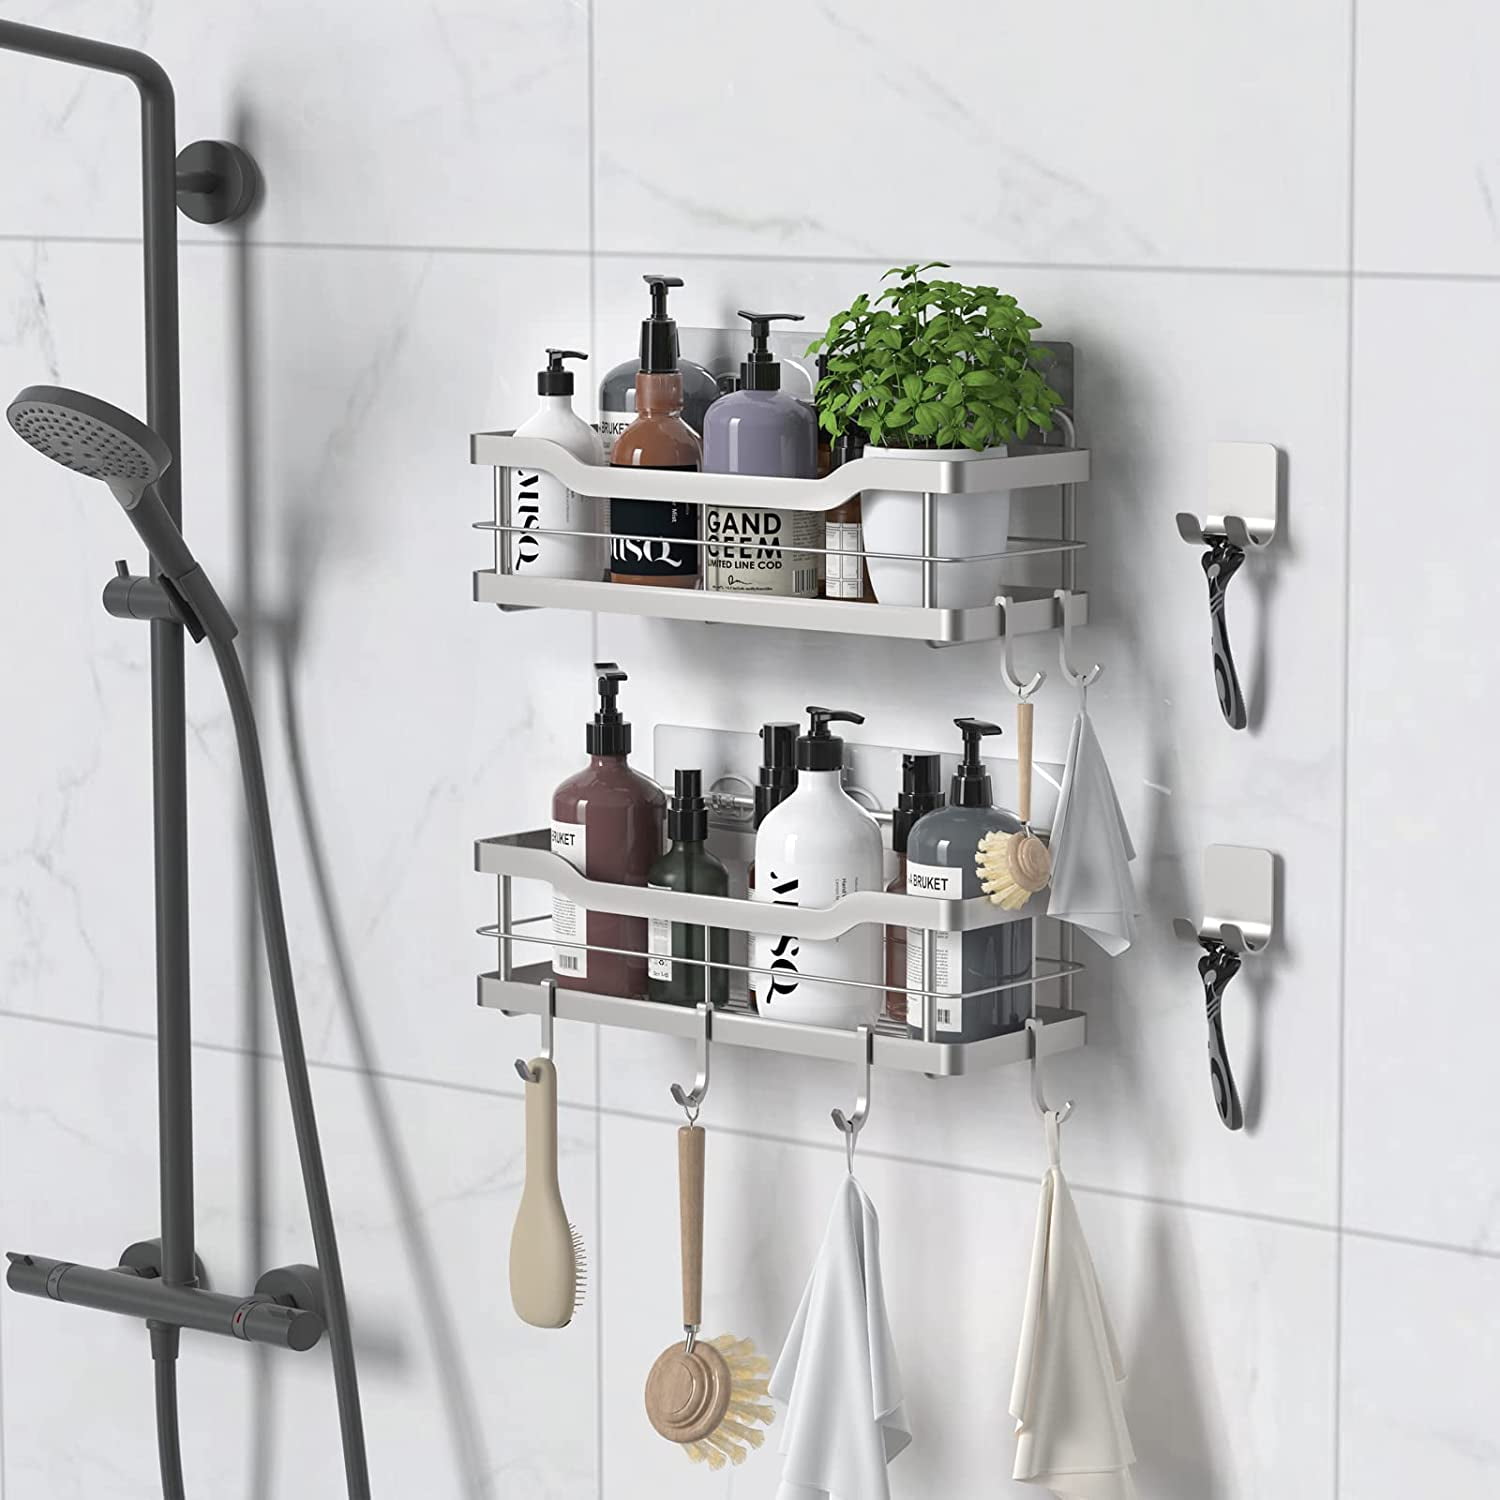  Carwiner Shower Shelf Deep Caddy 5-Pack basket with Soap Dish  Holder, Stainless Steel Bathroom Caddy Organizer Rack Adhesive Shampoo  Holder Wall Mounted No Drilling : Home & Kitchen